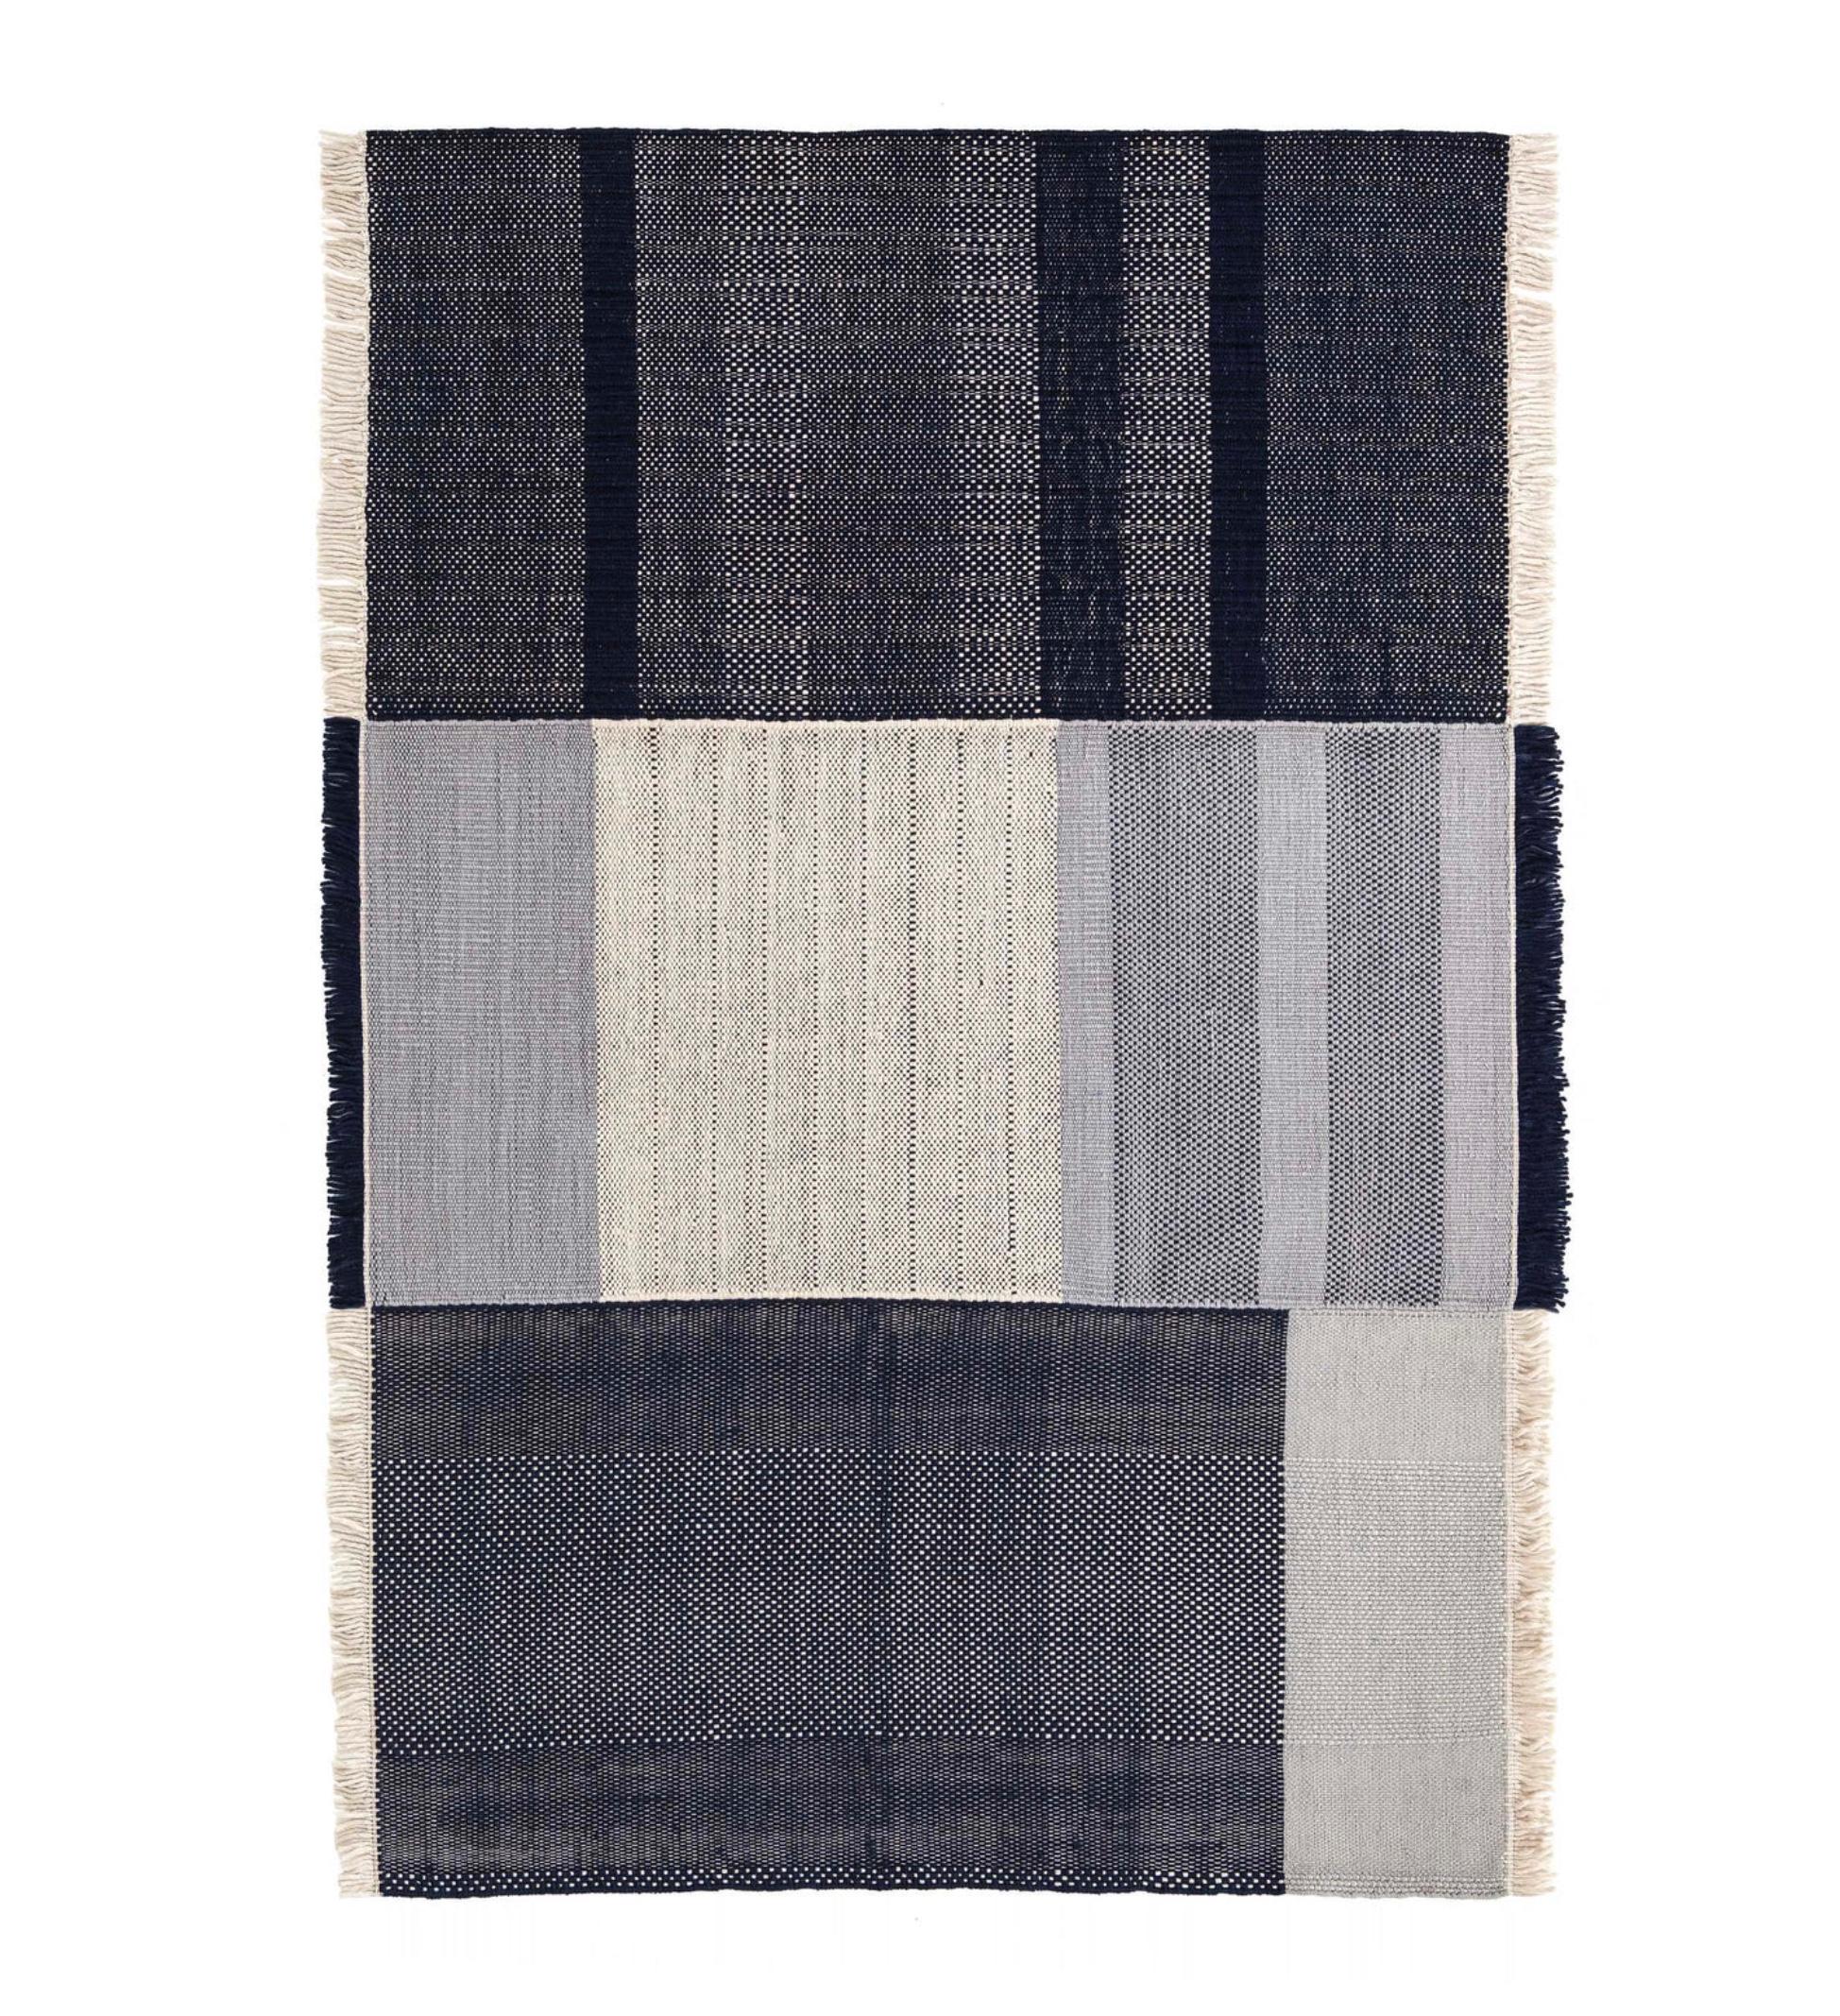 Nani Marquina & Elisa Padrón 'Tres' Outdoor rug. Current production, Spain. Measures: 170 x 240 cm

Tres Outdoor aims to transfer the warmth of the iconic Tres collection to the outdoor world. Made from 100% recycled PET, a material produced